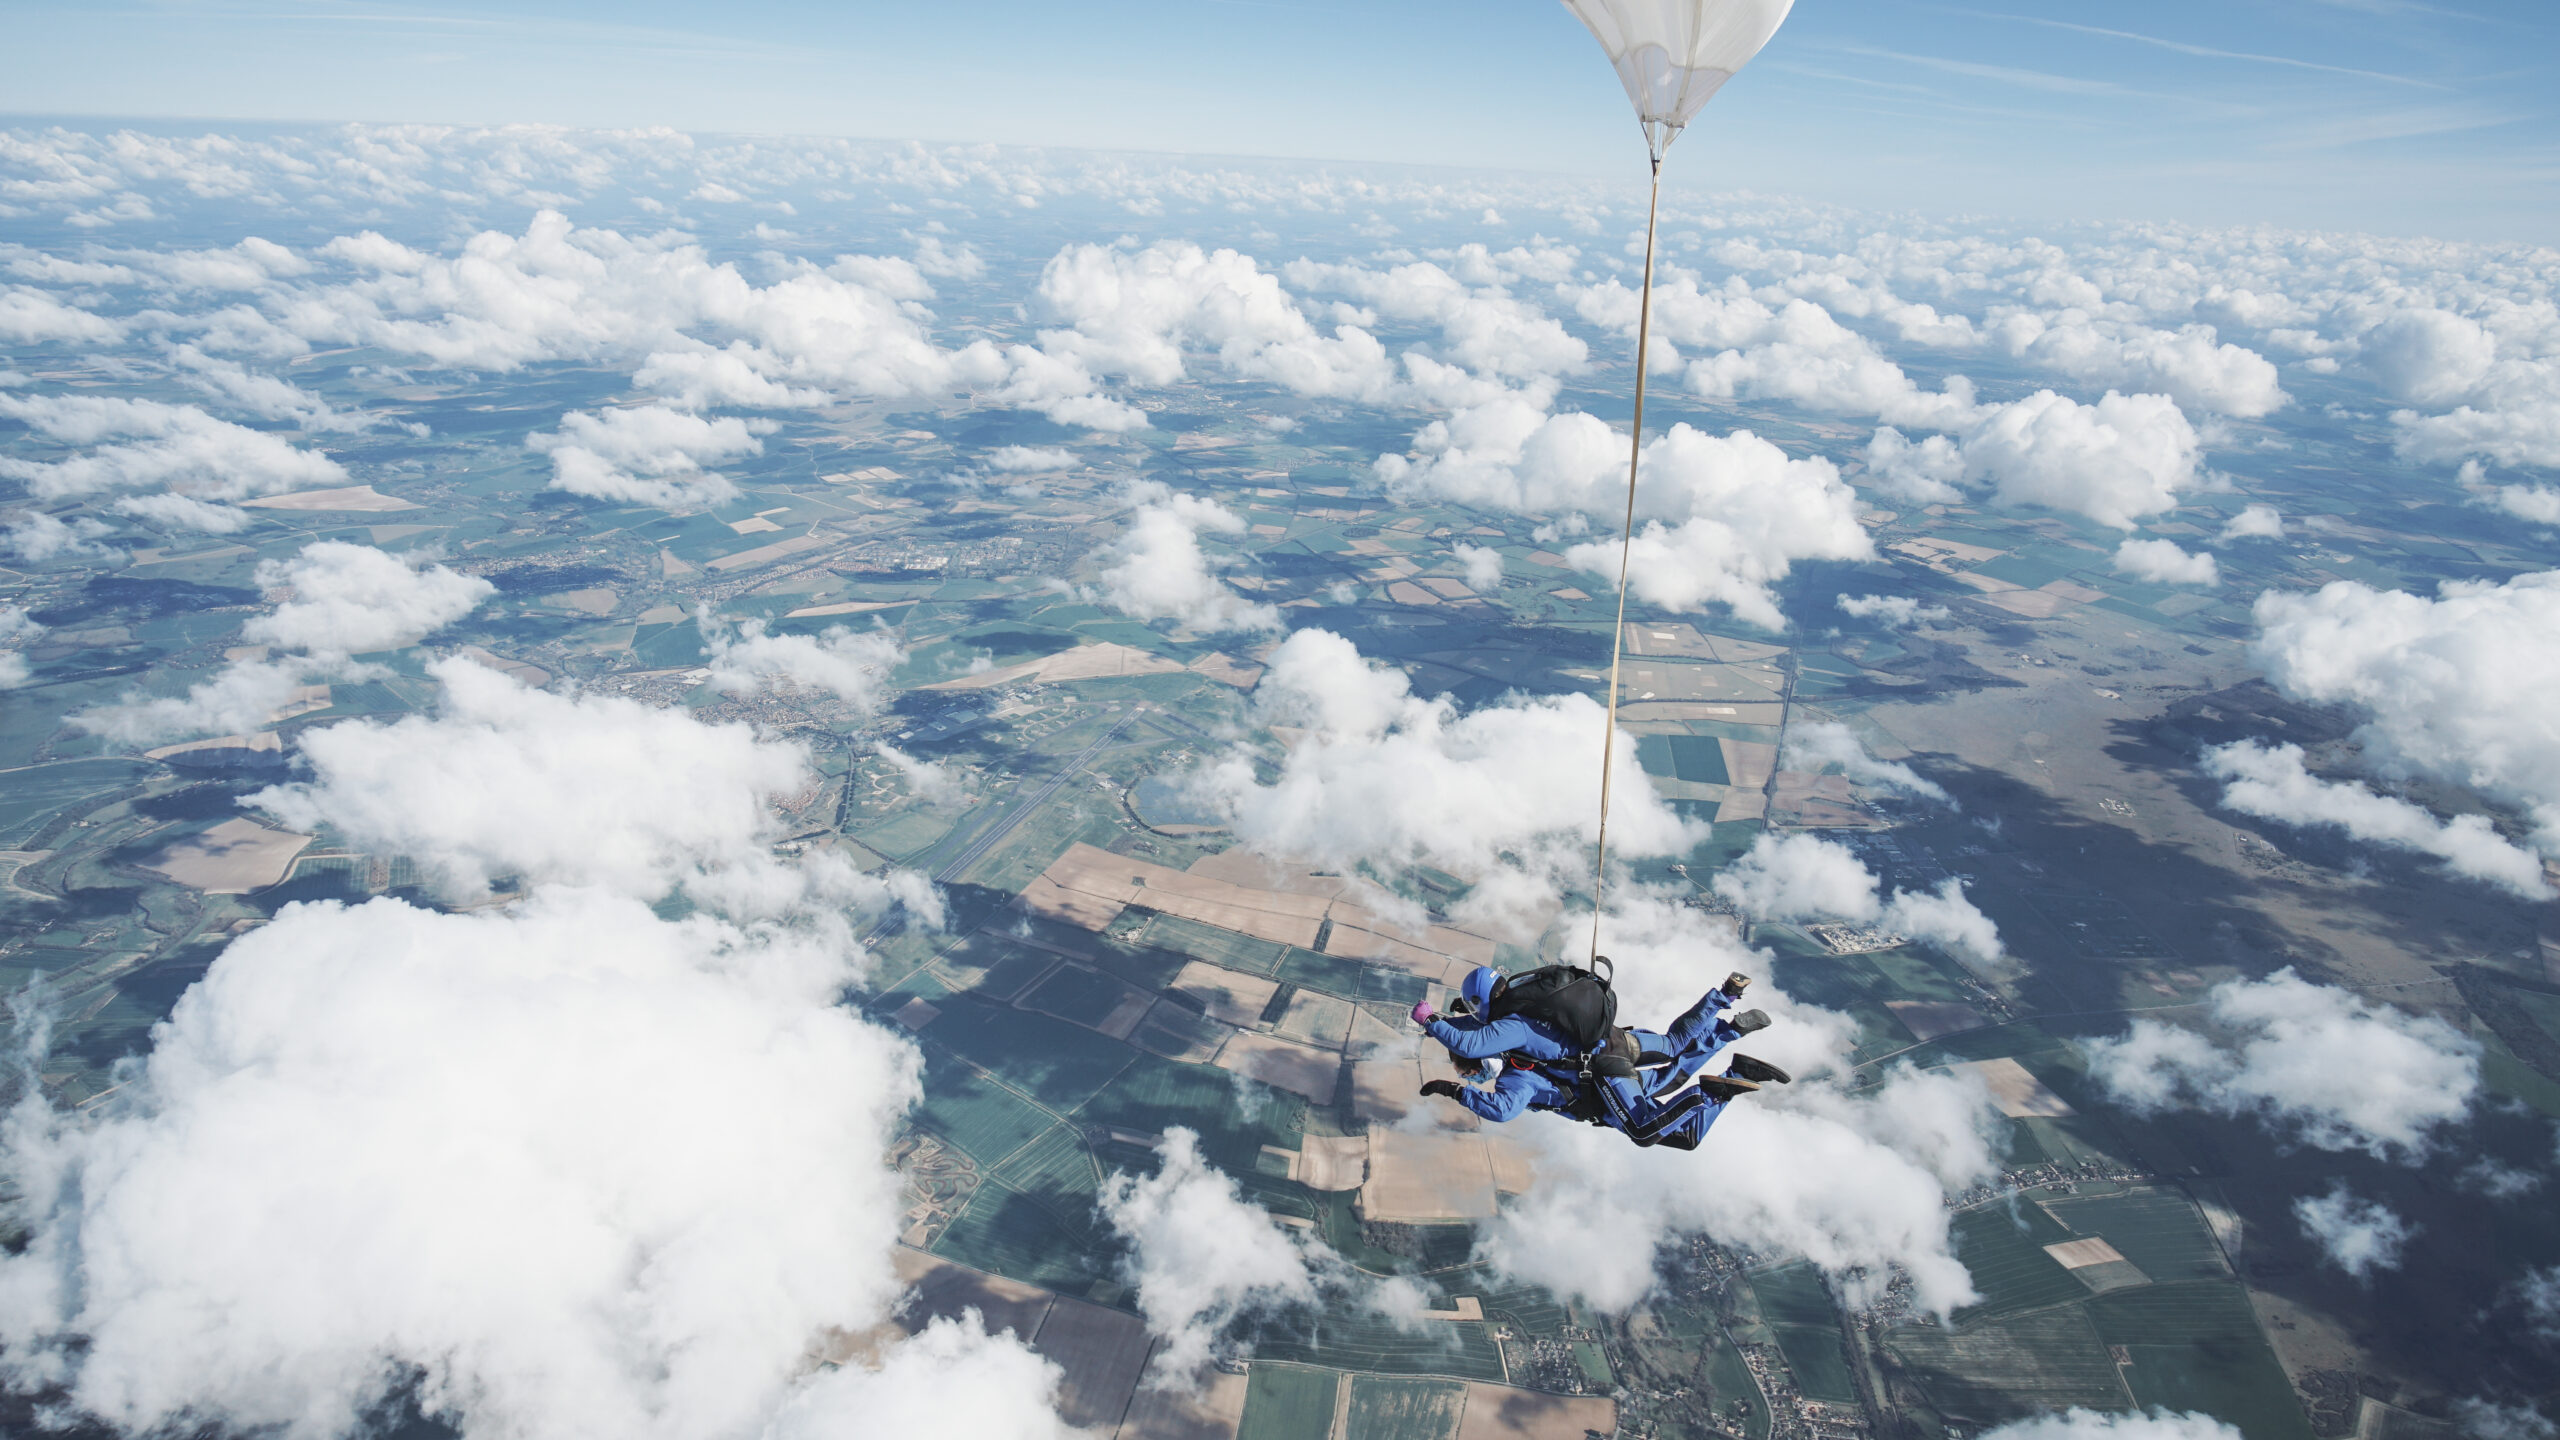 Tandem Skydiver in freefall with instructor